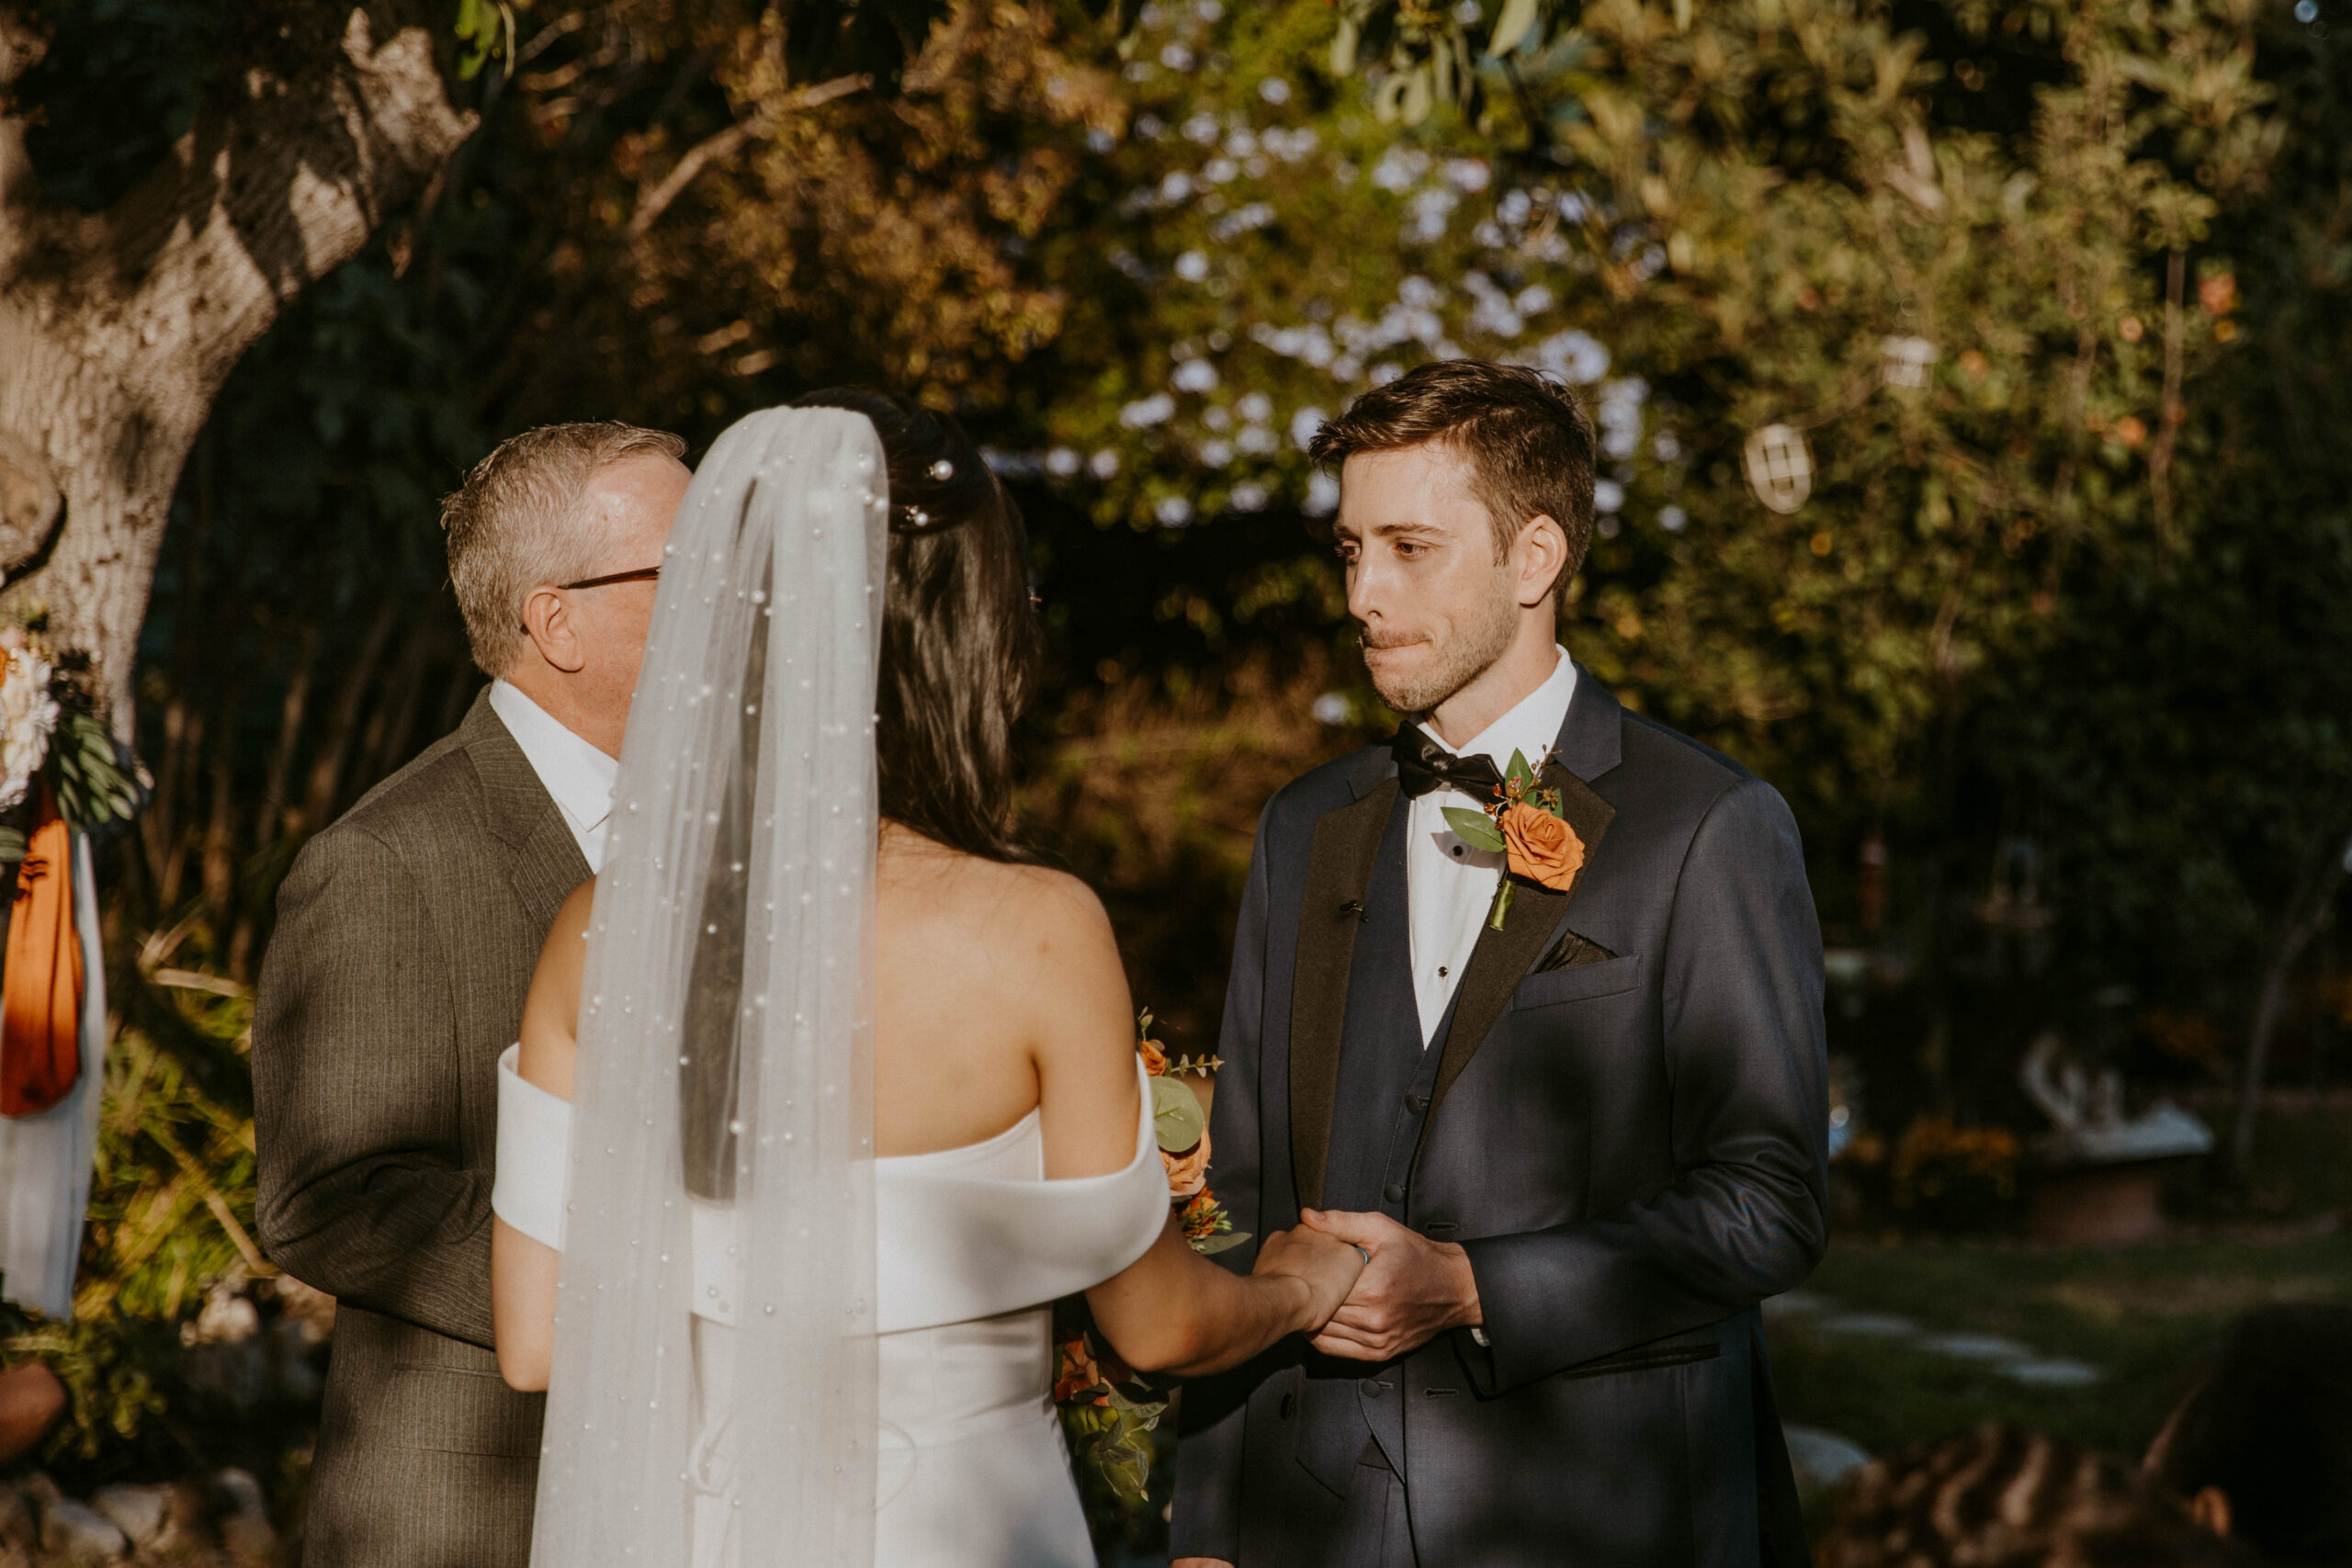 A bride and groom exchange vows at an outdoor wedding ceremony, with an officiant standing in the background at their intimate backyard wedding.